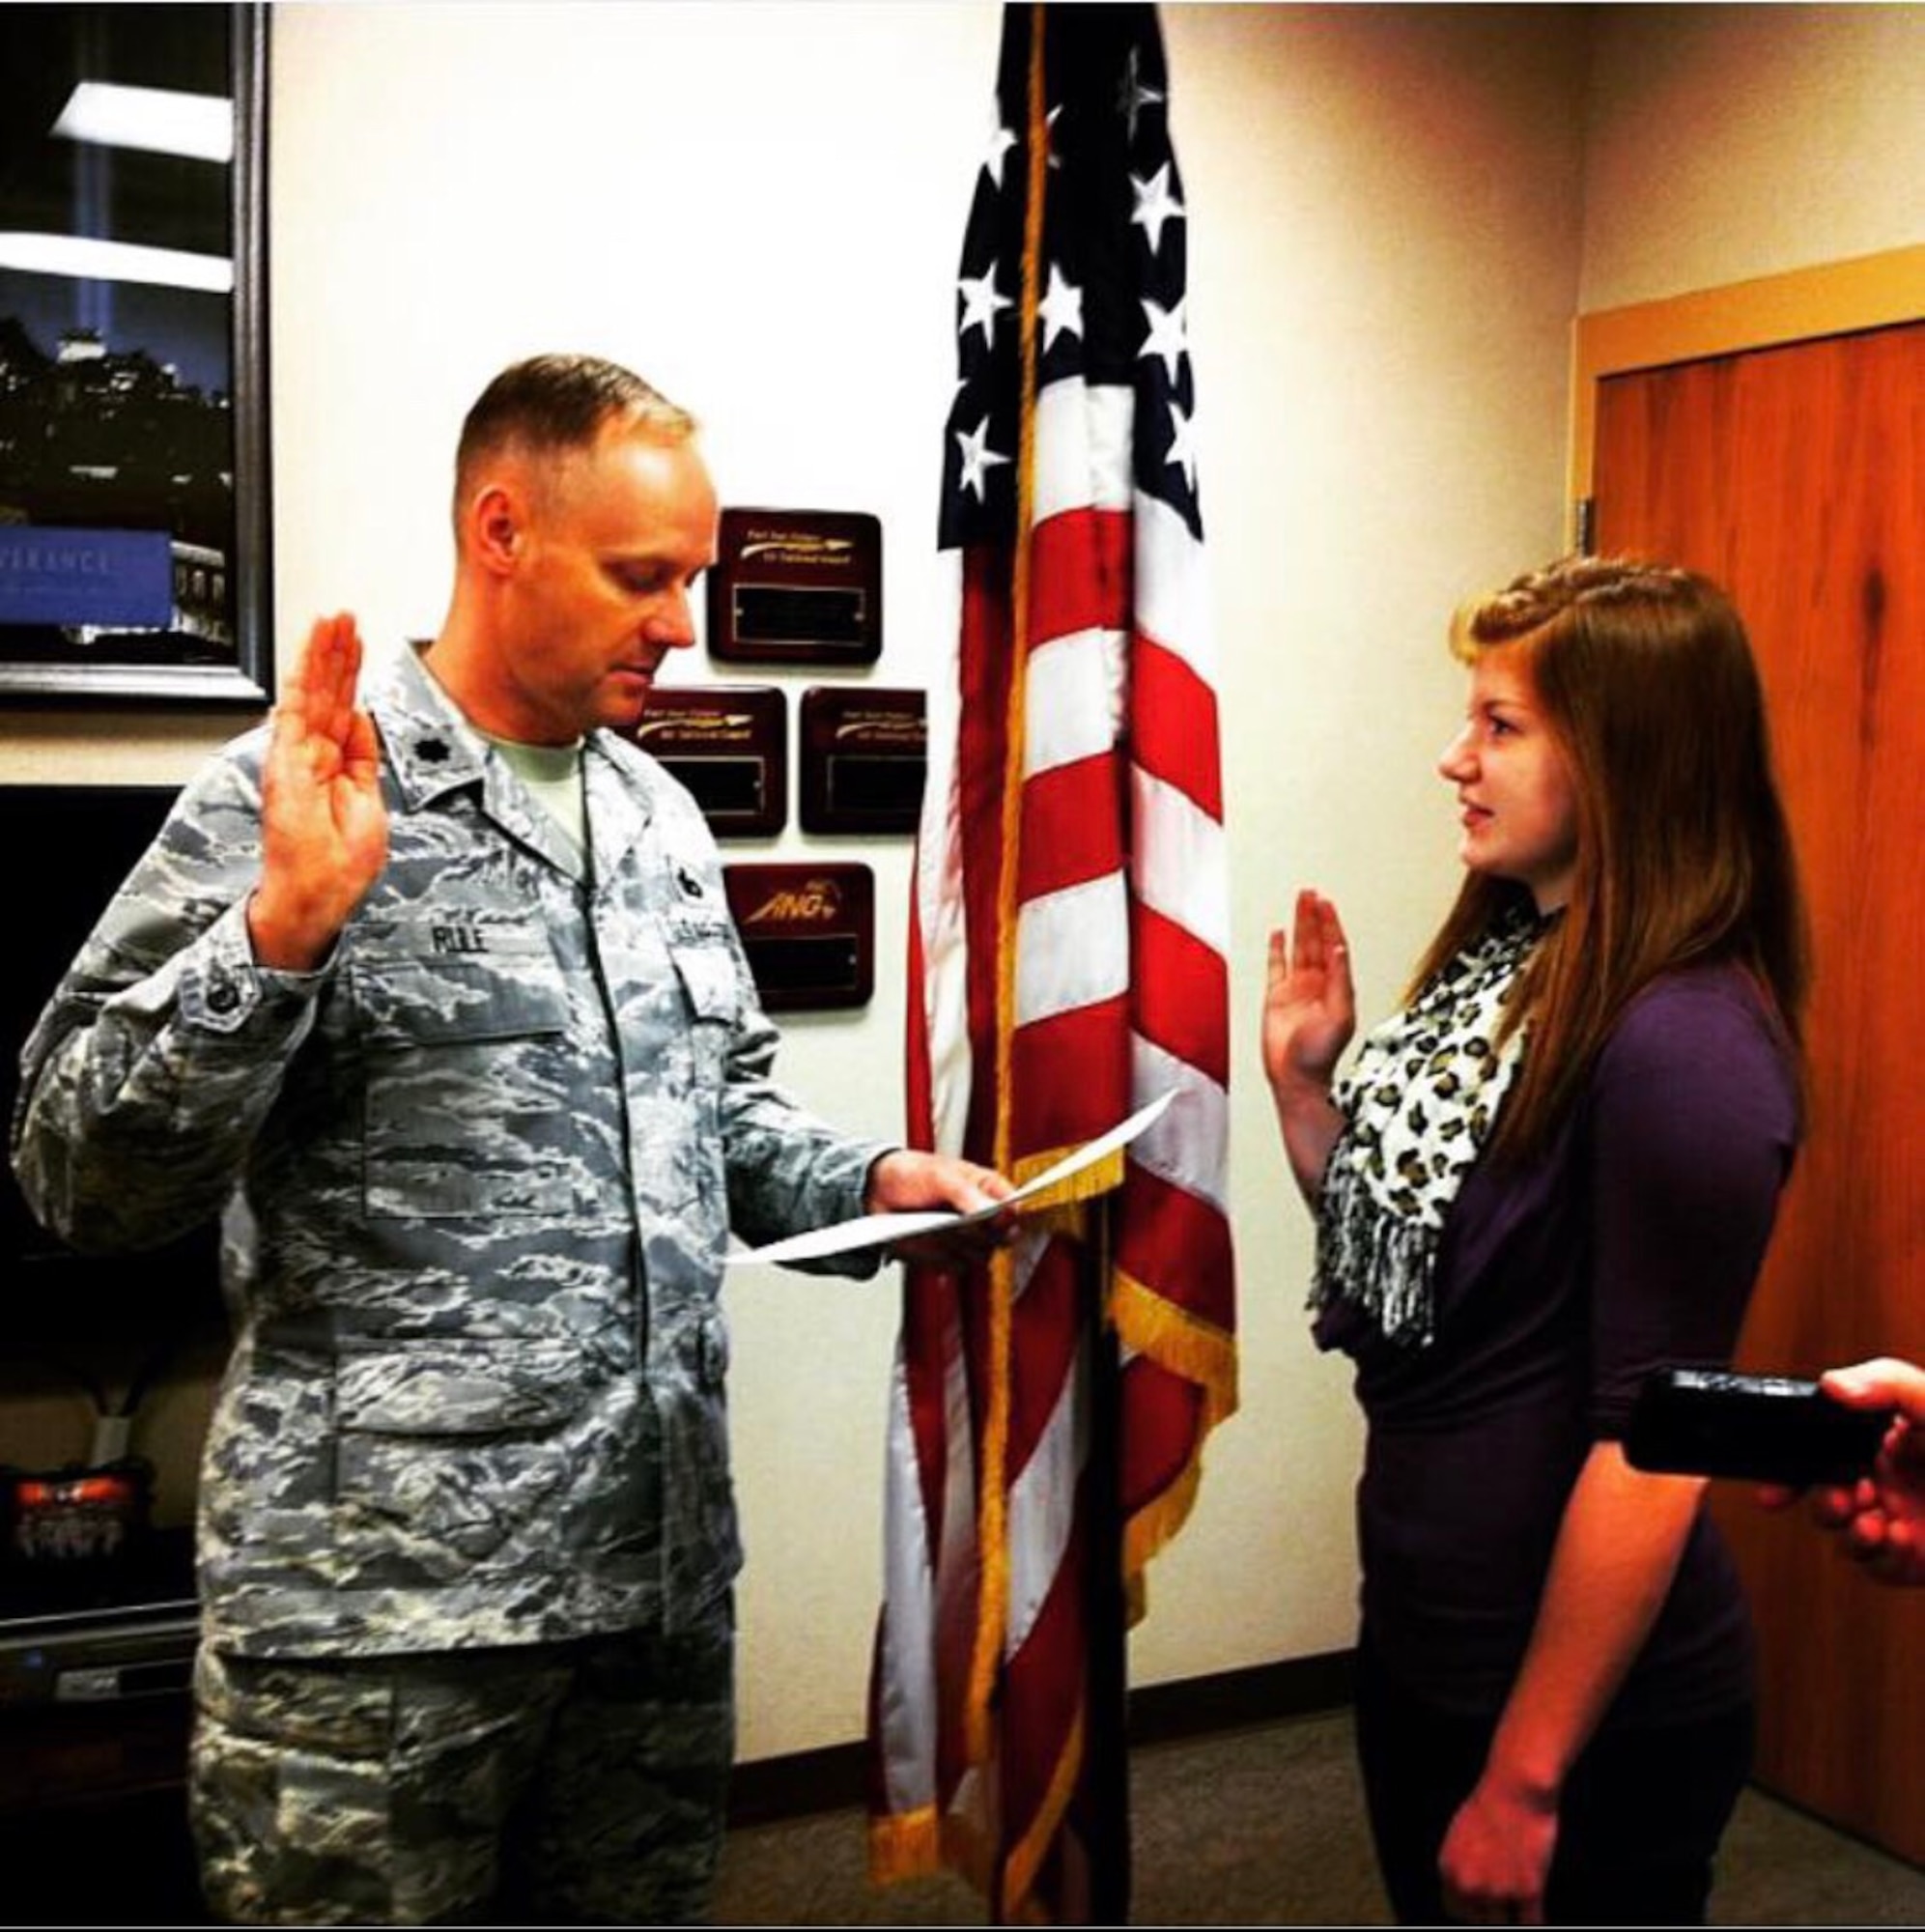 Kristianna Konietzko takes the oath of enlistment at the 148th Fighter Wing in February 2013. (courtesy photo)